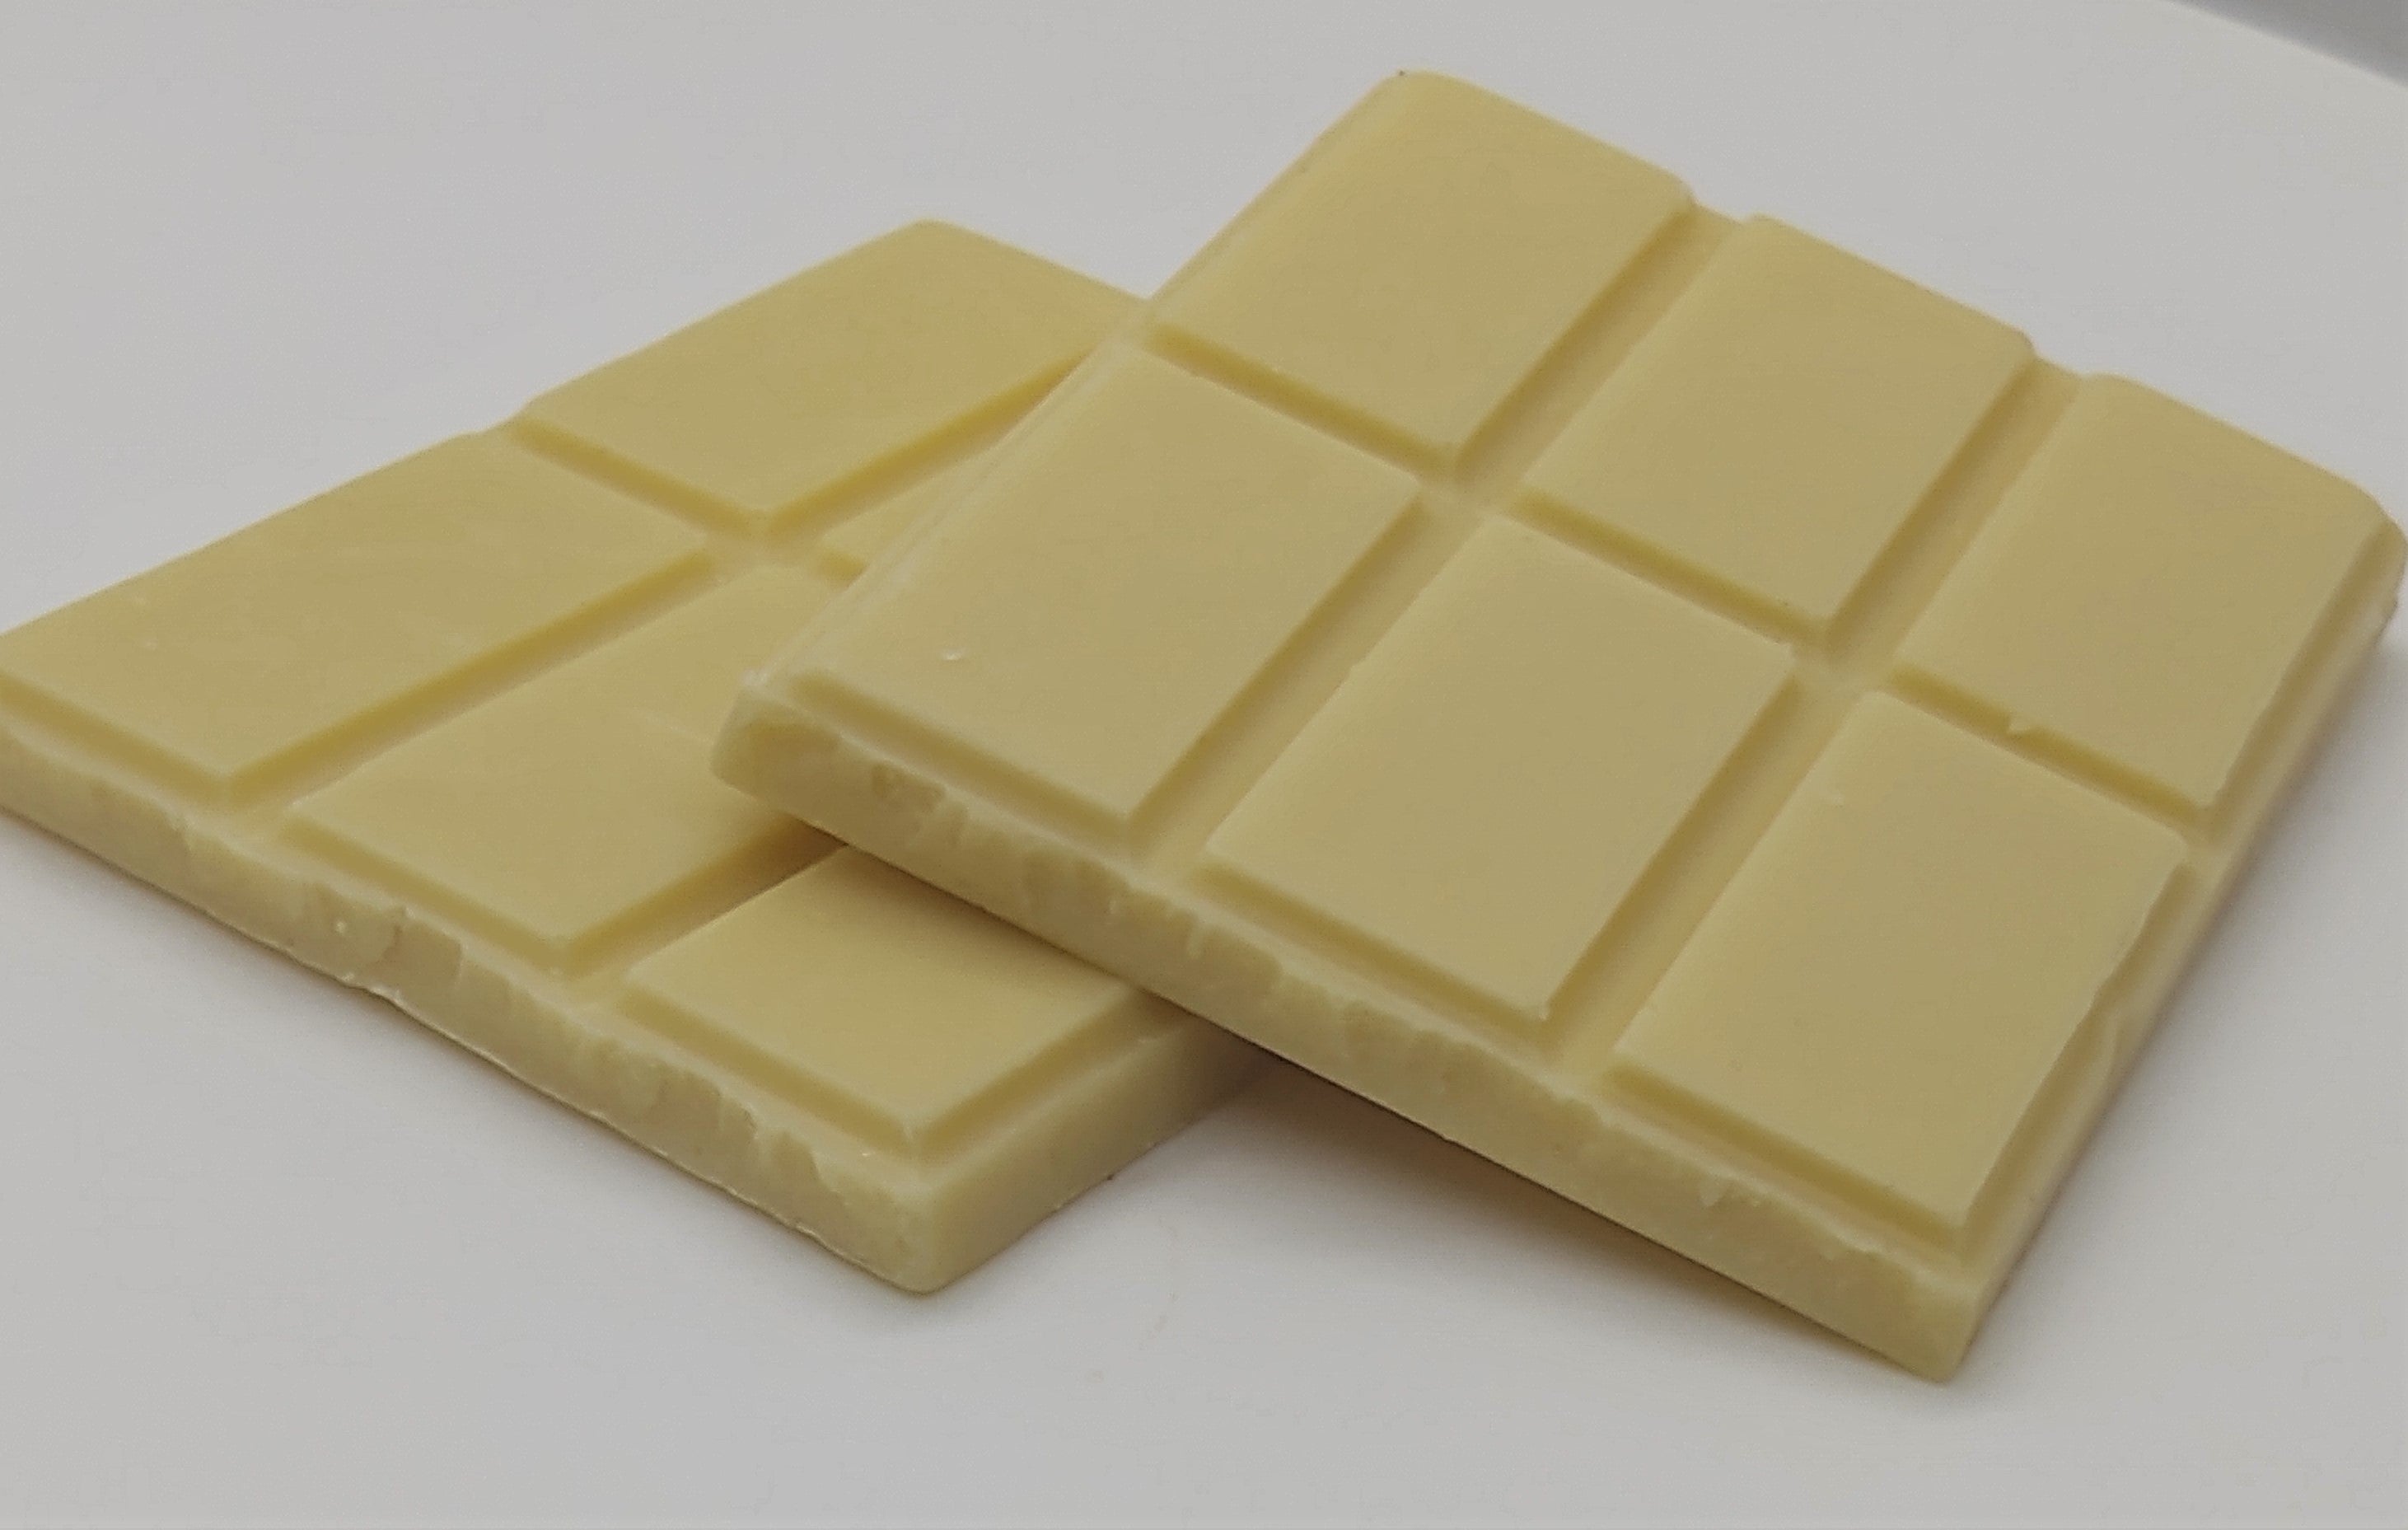 Pictured: a solid white chocolate bar